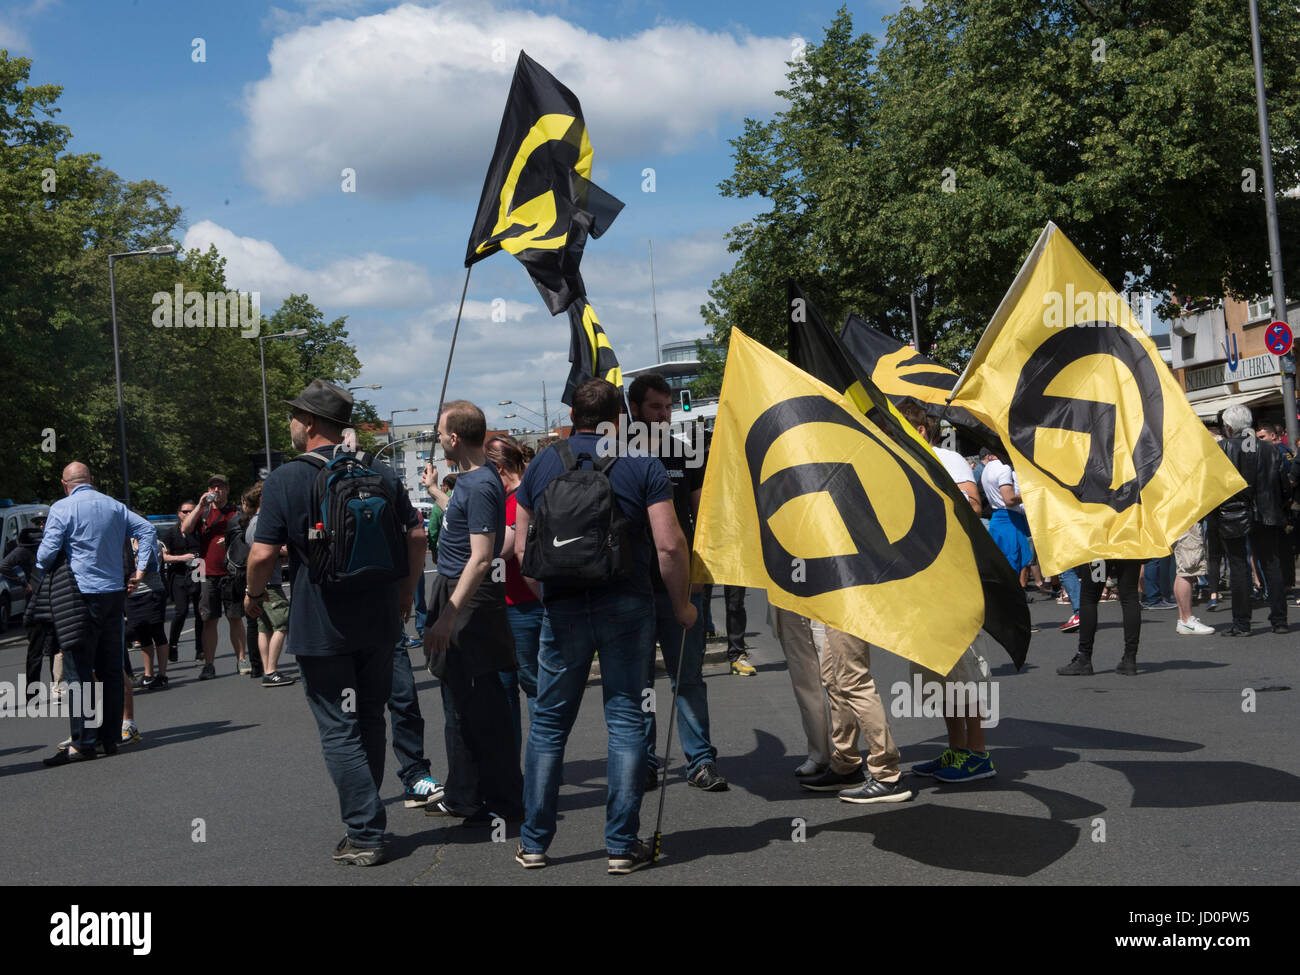 Berlin, Germany. 17th June, 2017. Supporters of the right-wing 'Identitaere Bewegung' (lit. identitarian movement) on Brunnenstrasse in Berlin, Germany, 17 June 2017. Various groups protested against a demonstration by the right-wing group. Photo: Paul Zinken/dpa/Alamy Live News Stock Photo